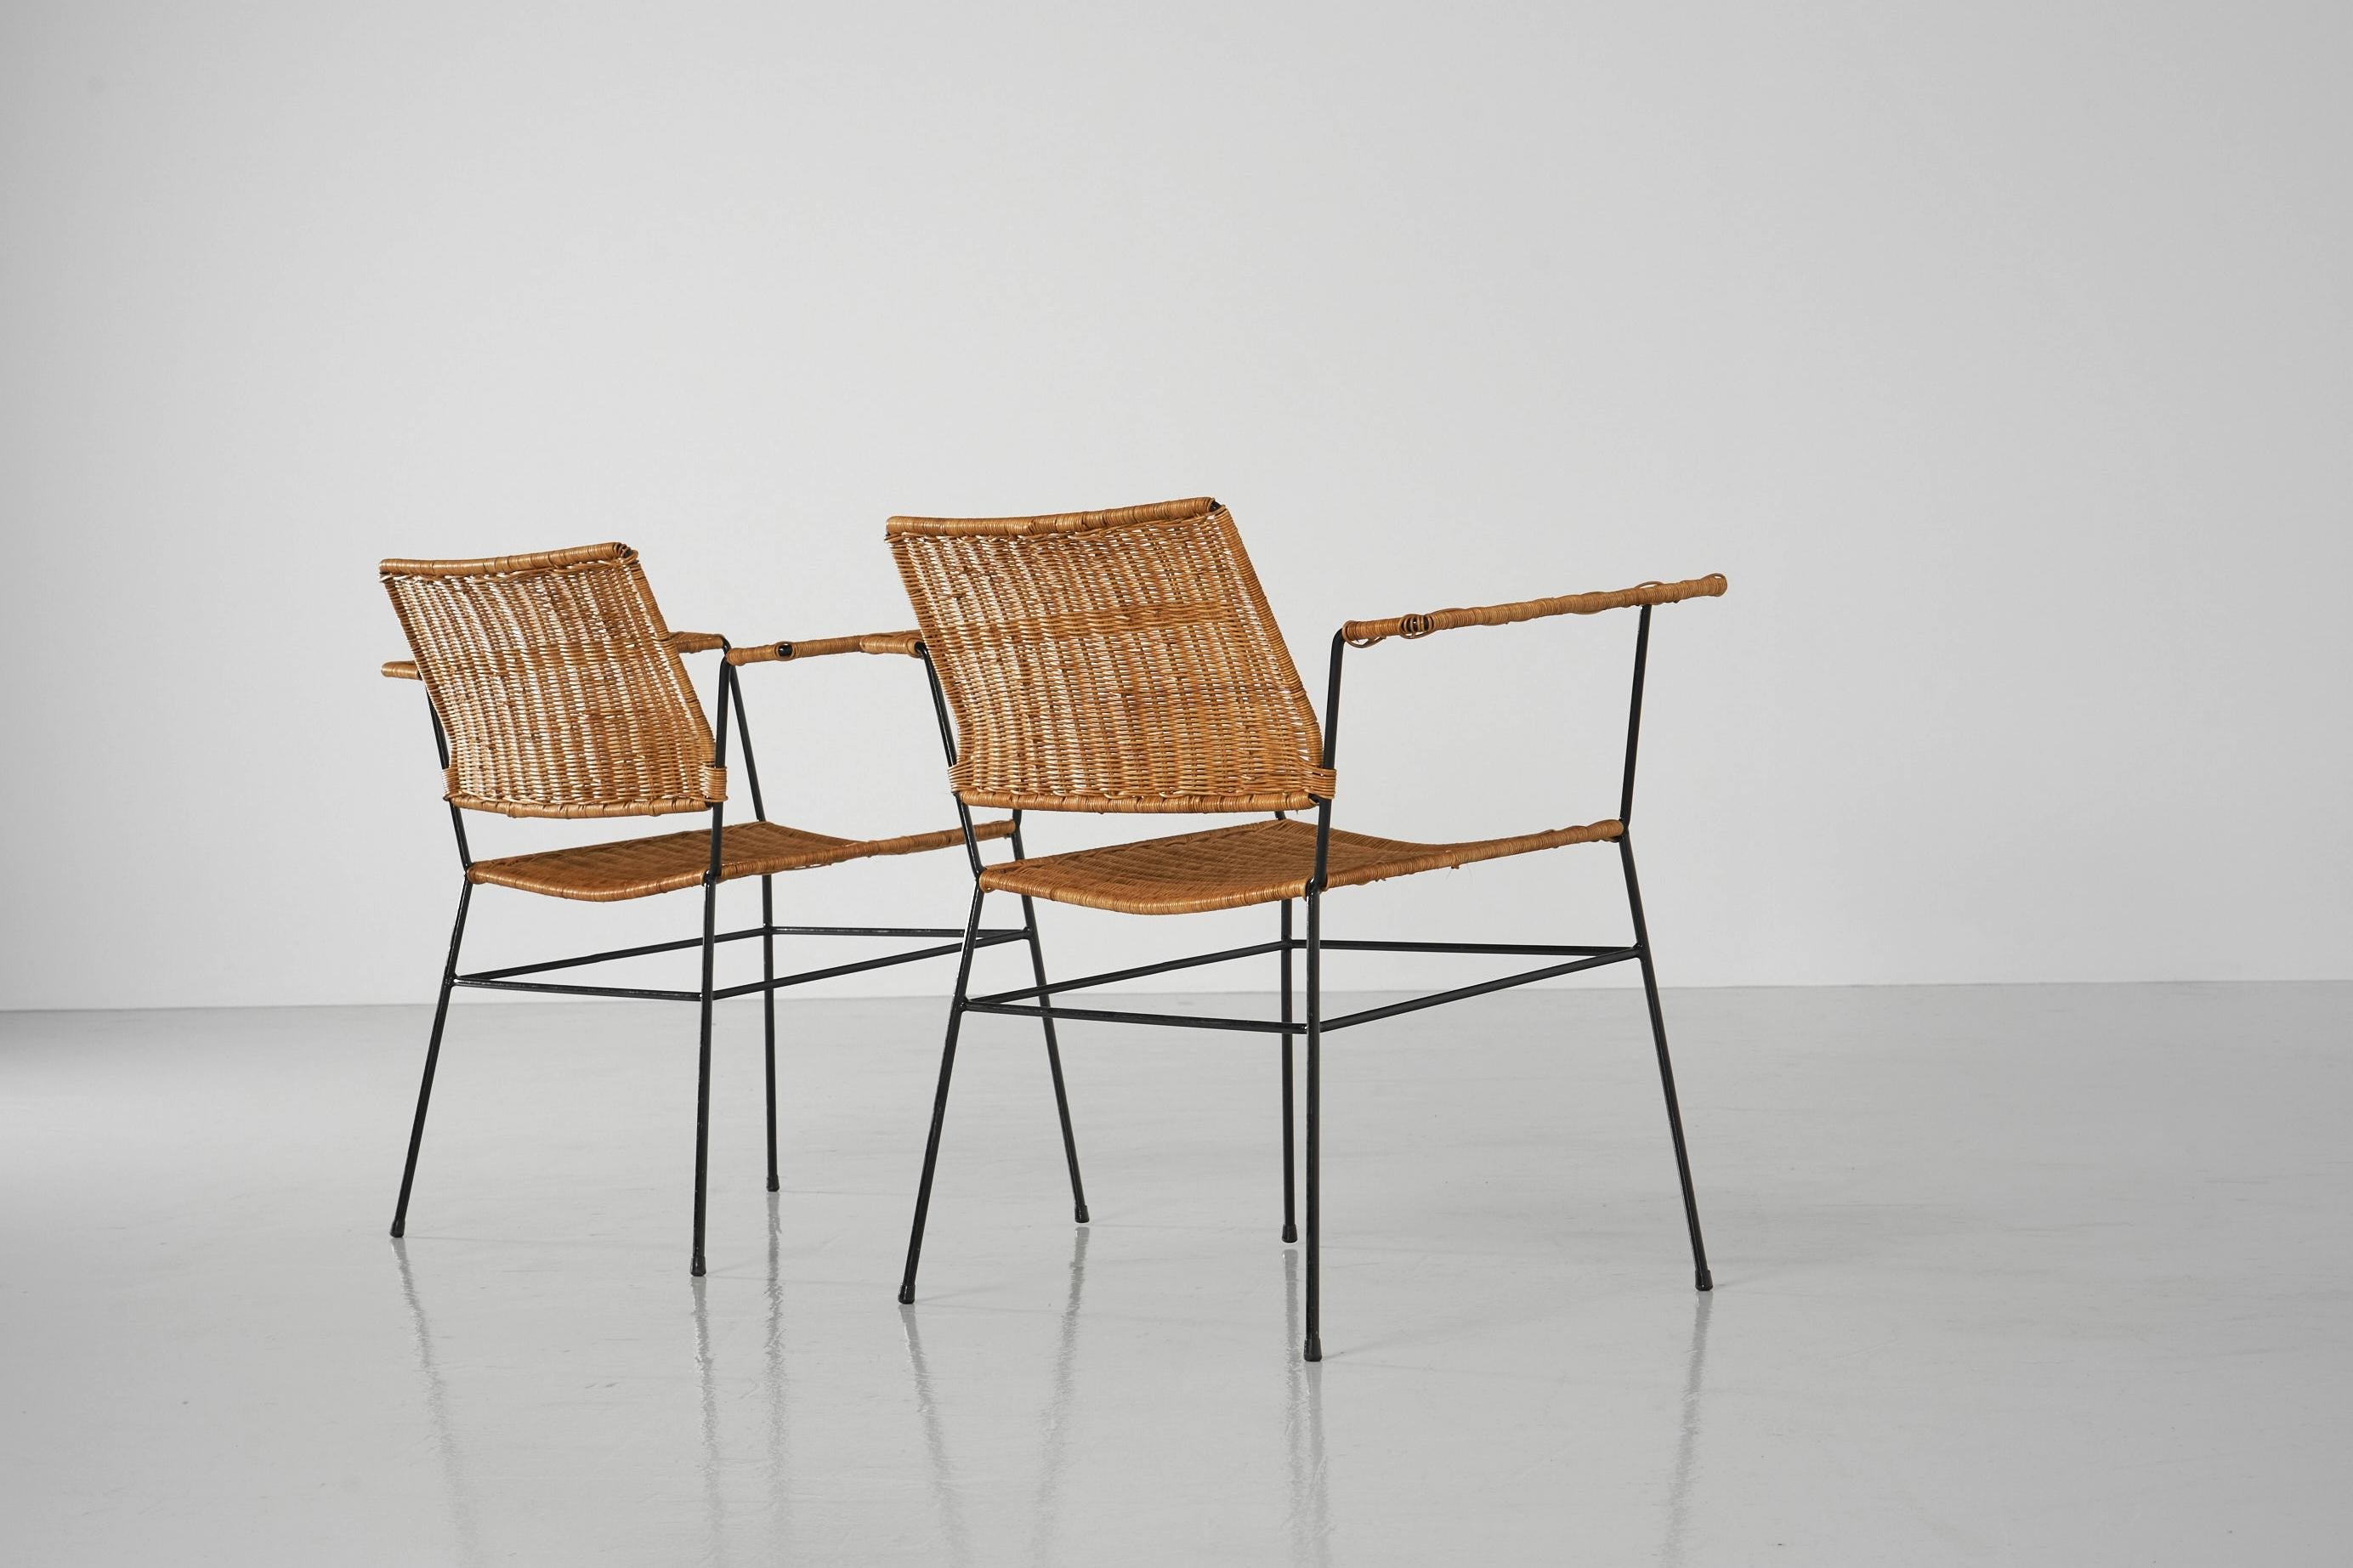 Herta Maria Witzemann Cane Armchairs Pair Germany, 1954 For Sale 2